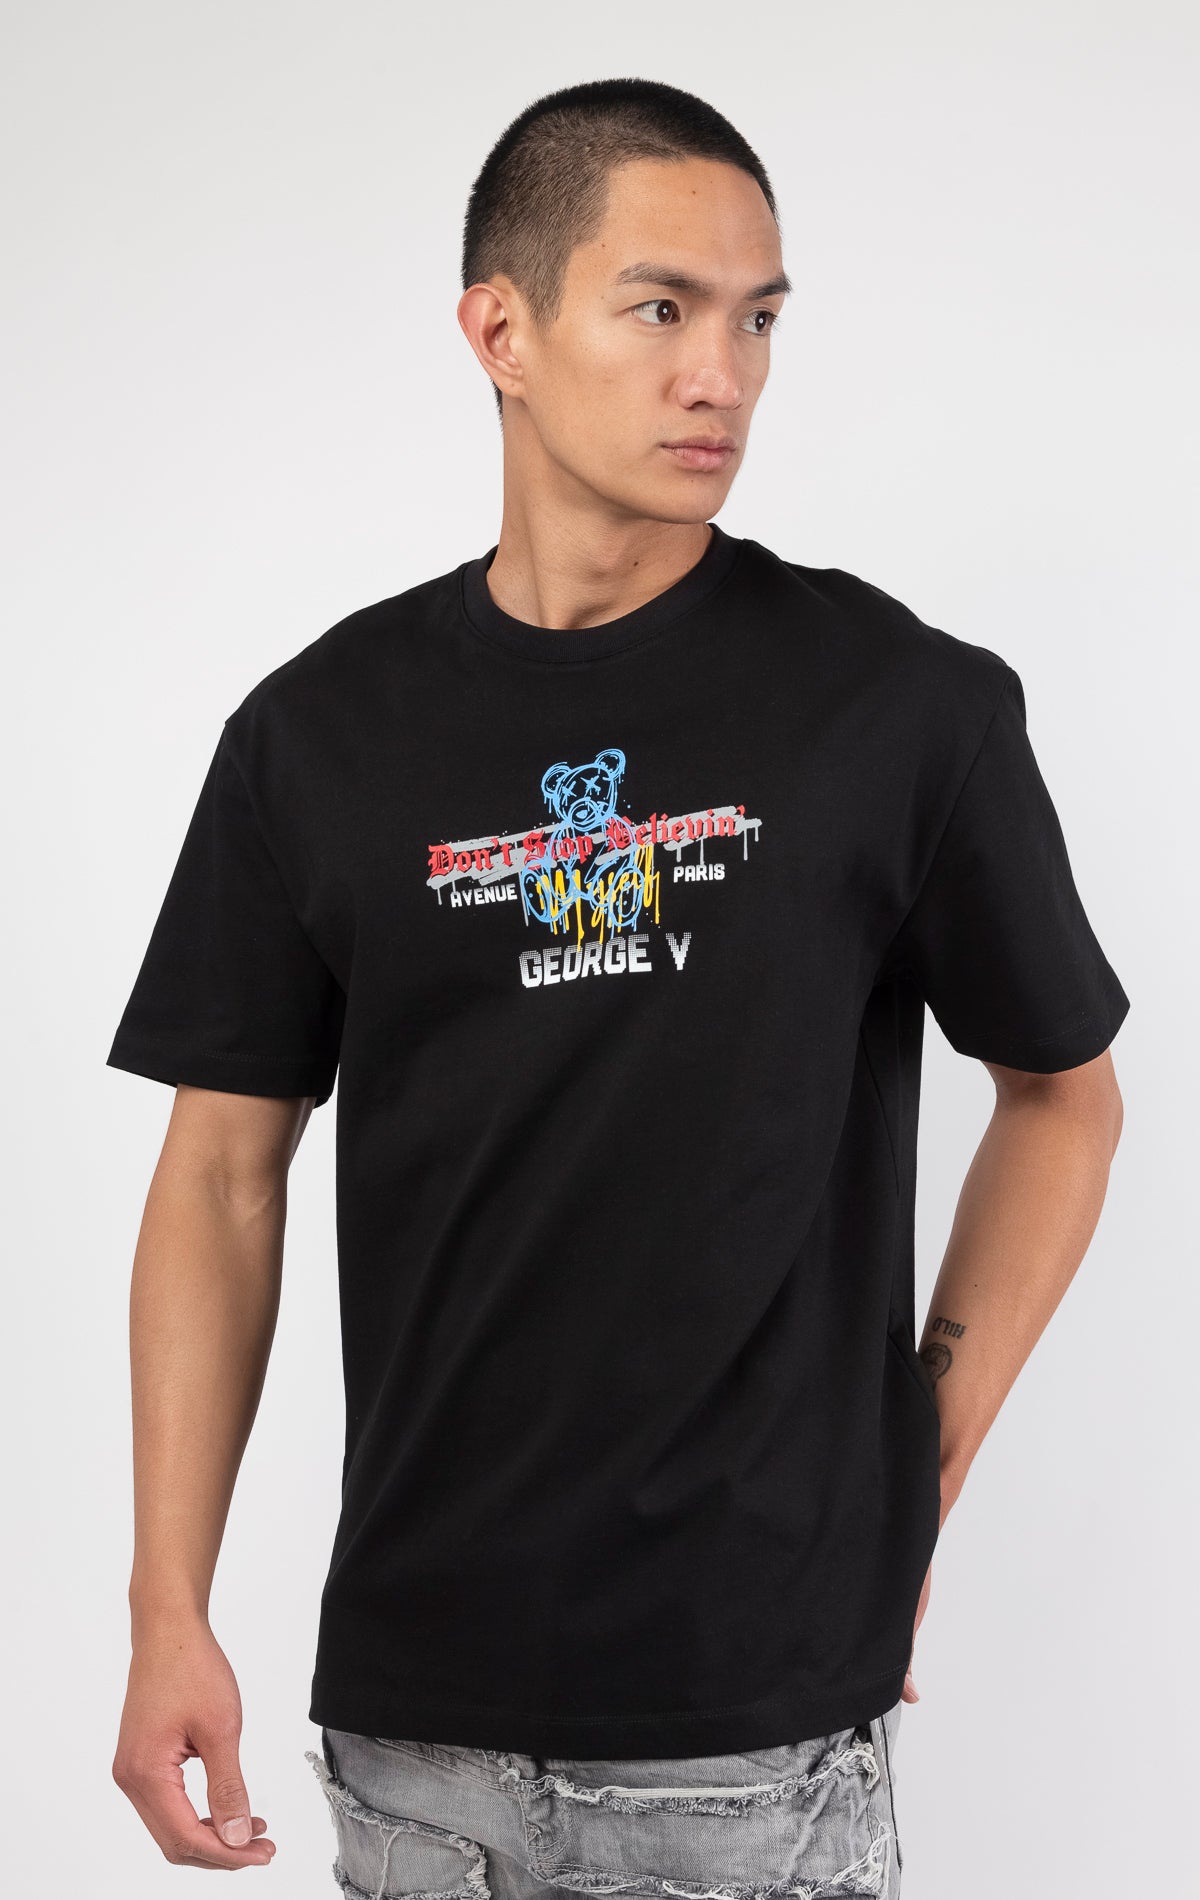 George V's "Don't Stop Believin" t-shirt features a BELIEVE design pattern, making it perfect for a refined streetwear look with jeans and sneakers. The stretchy fabric ensures a comfortable fit.